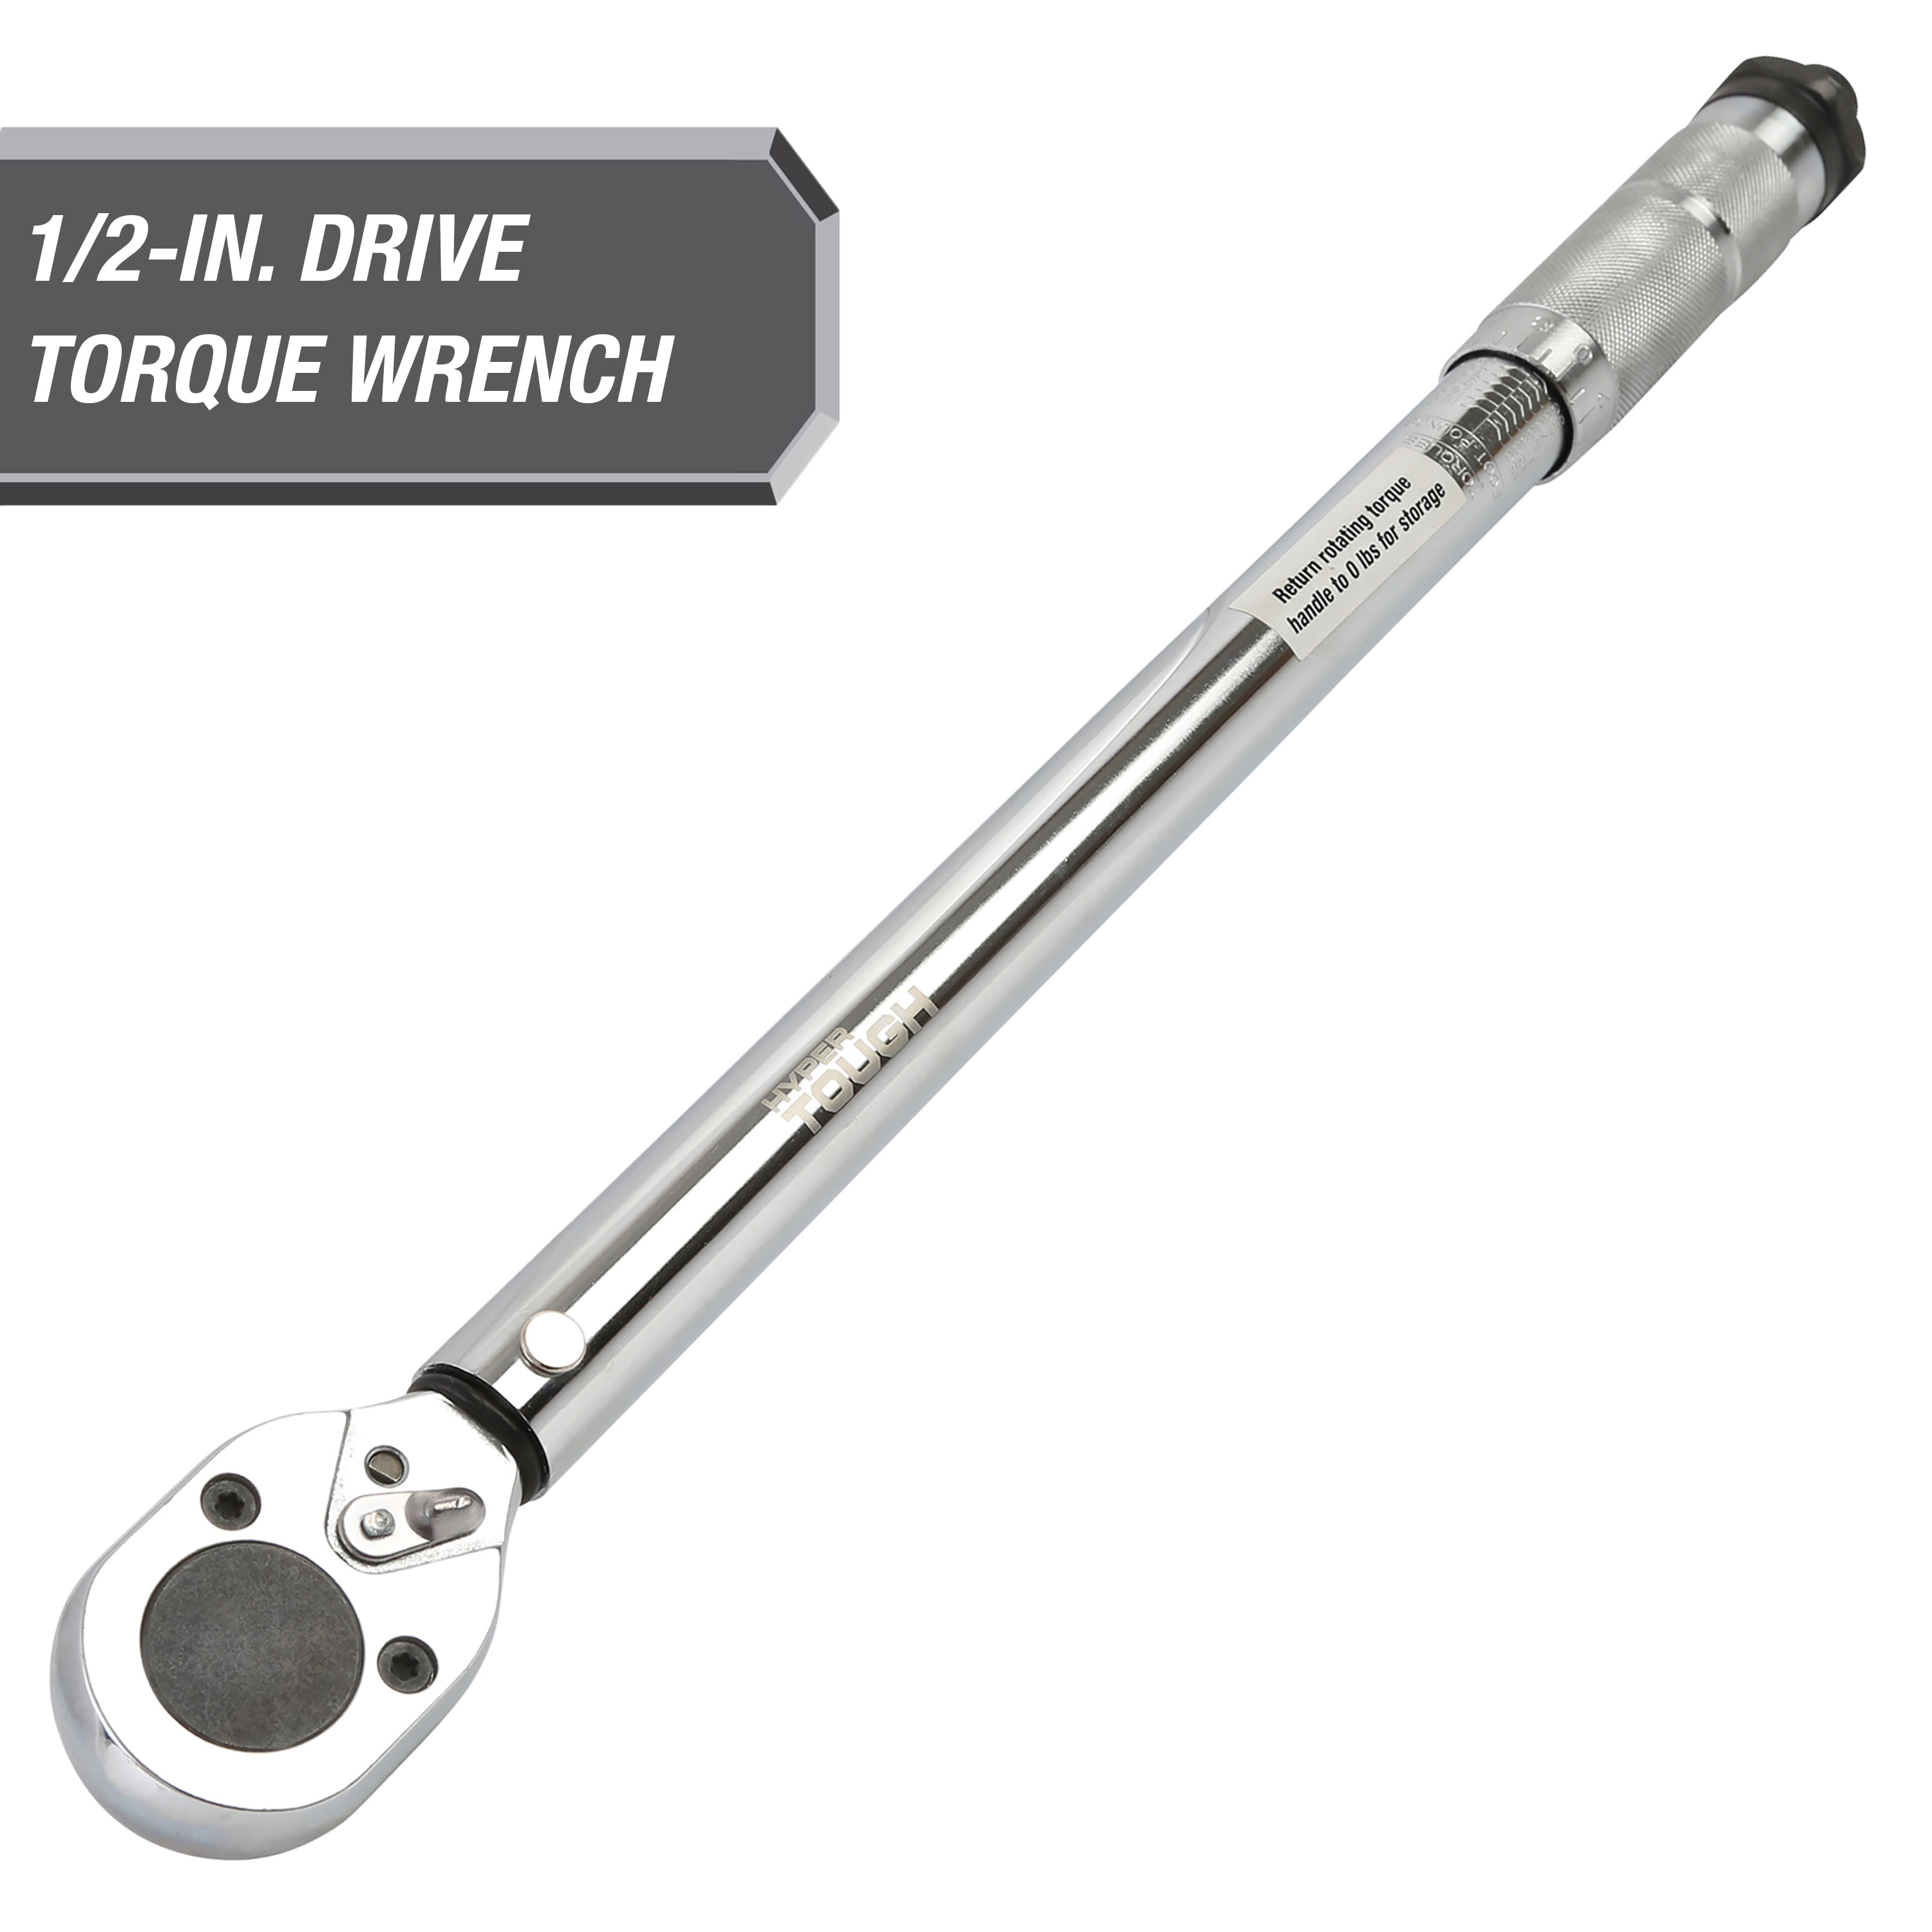 BENTISM Torque Wrench, 1/2 Drive Click Torque Wrench  10-150ft.lb/14-204n.m, Dual-Direction Adjustable Torque Wrench Set,  Mechanical Dual Range Scales Torque Wrench Kit with Adapters Extension Rod  